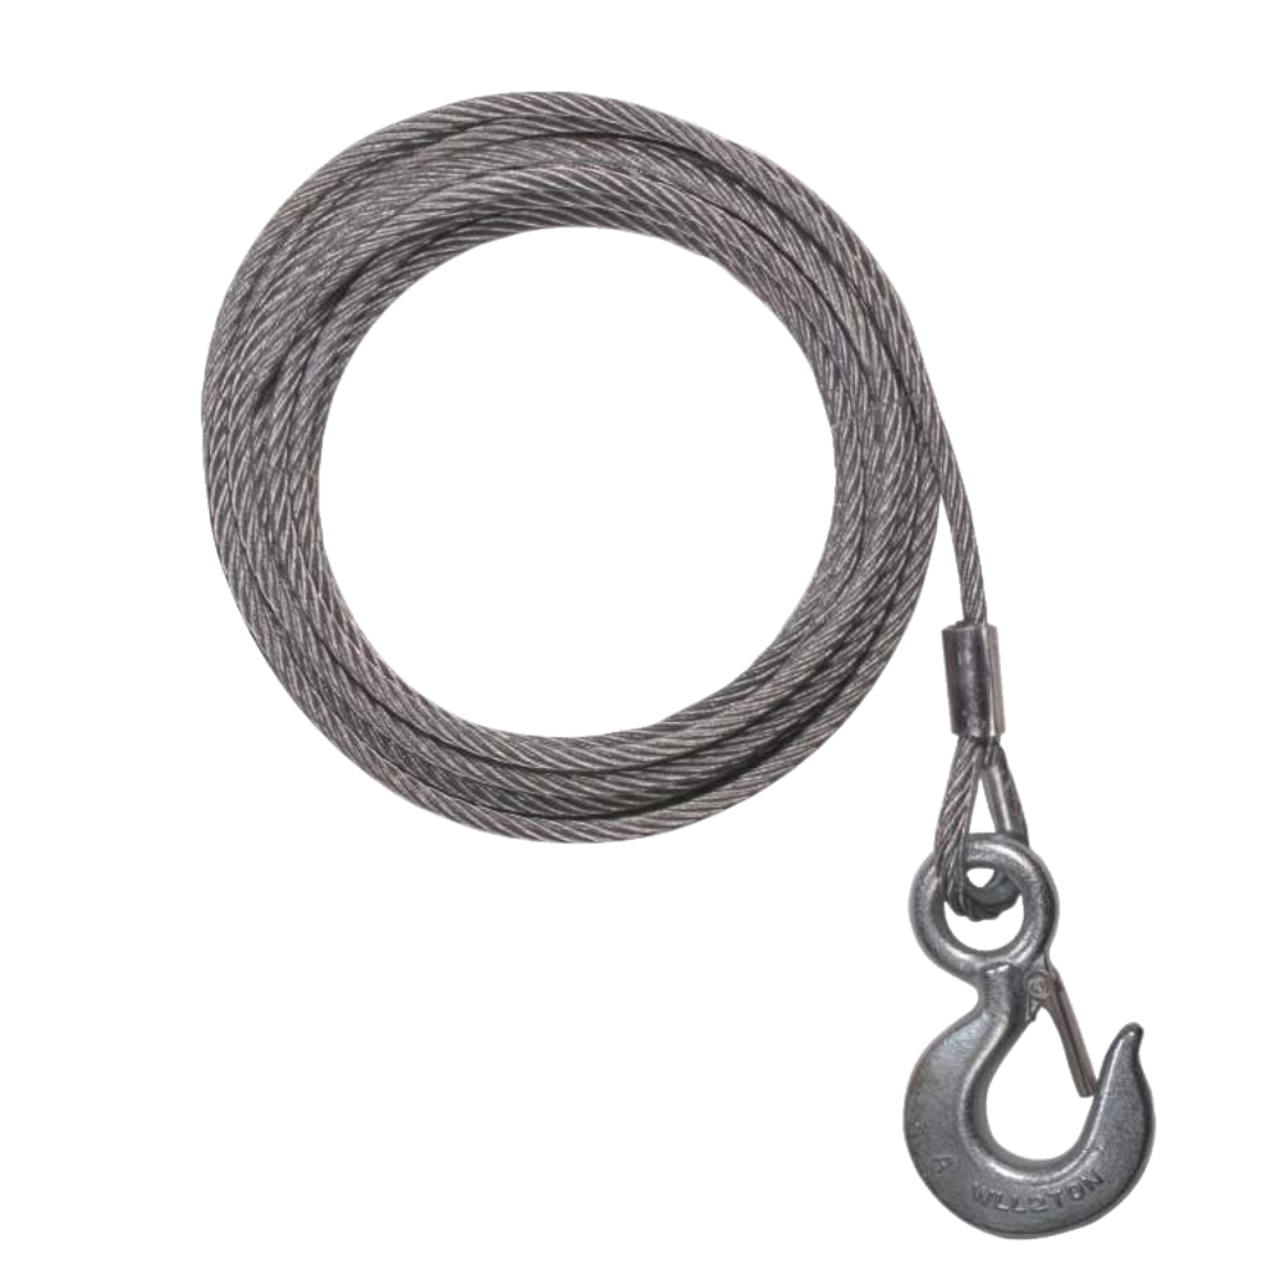 Ben-mor ASY-WC-25 Galvanized-Steel Winch Cable, 25-ft x 3/16-in